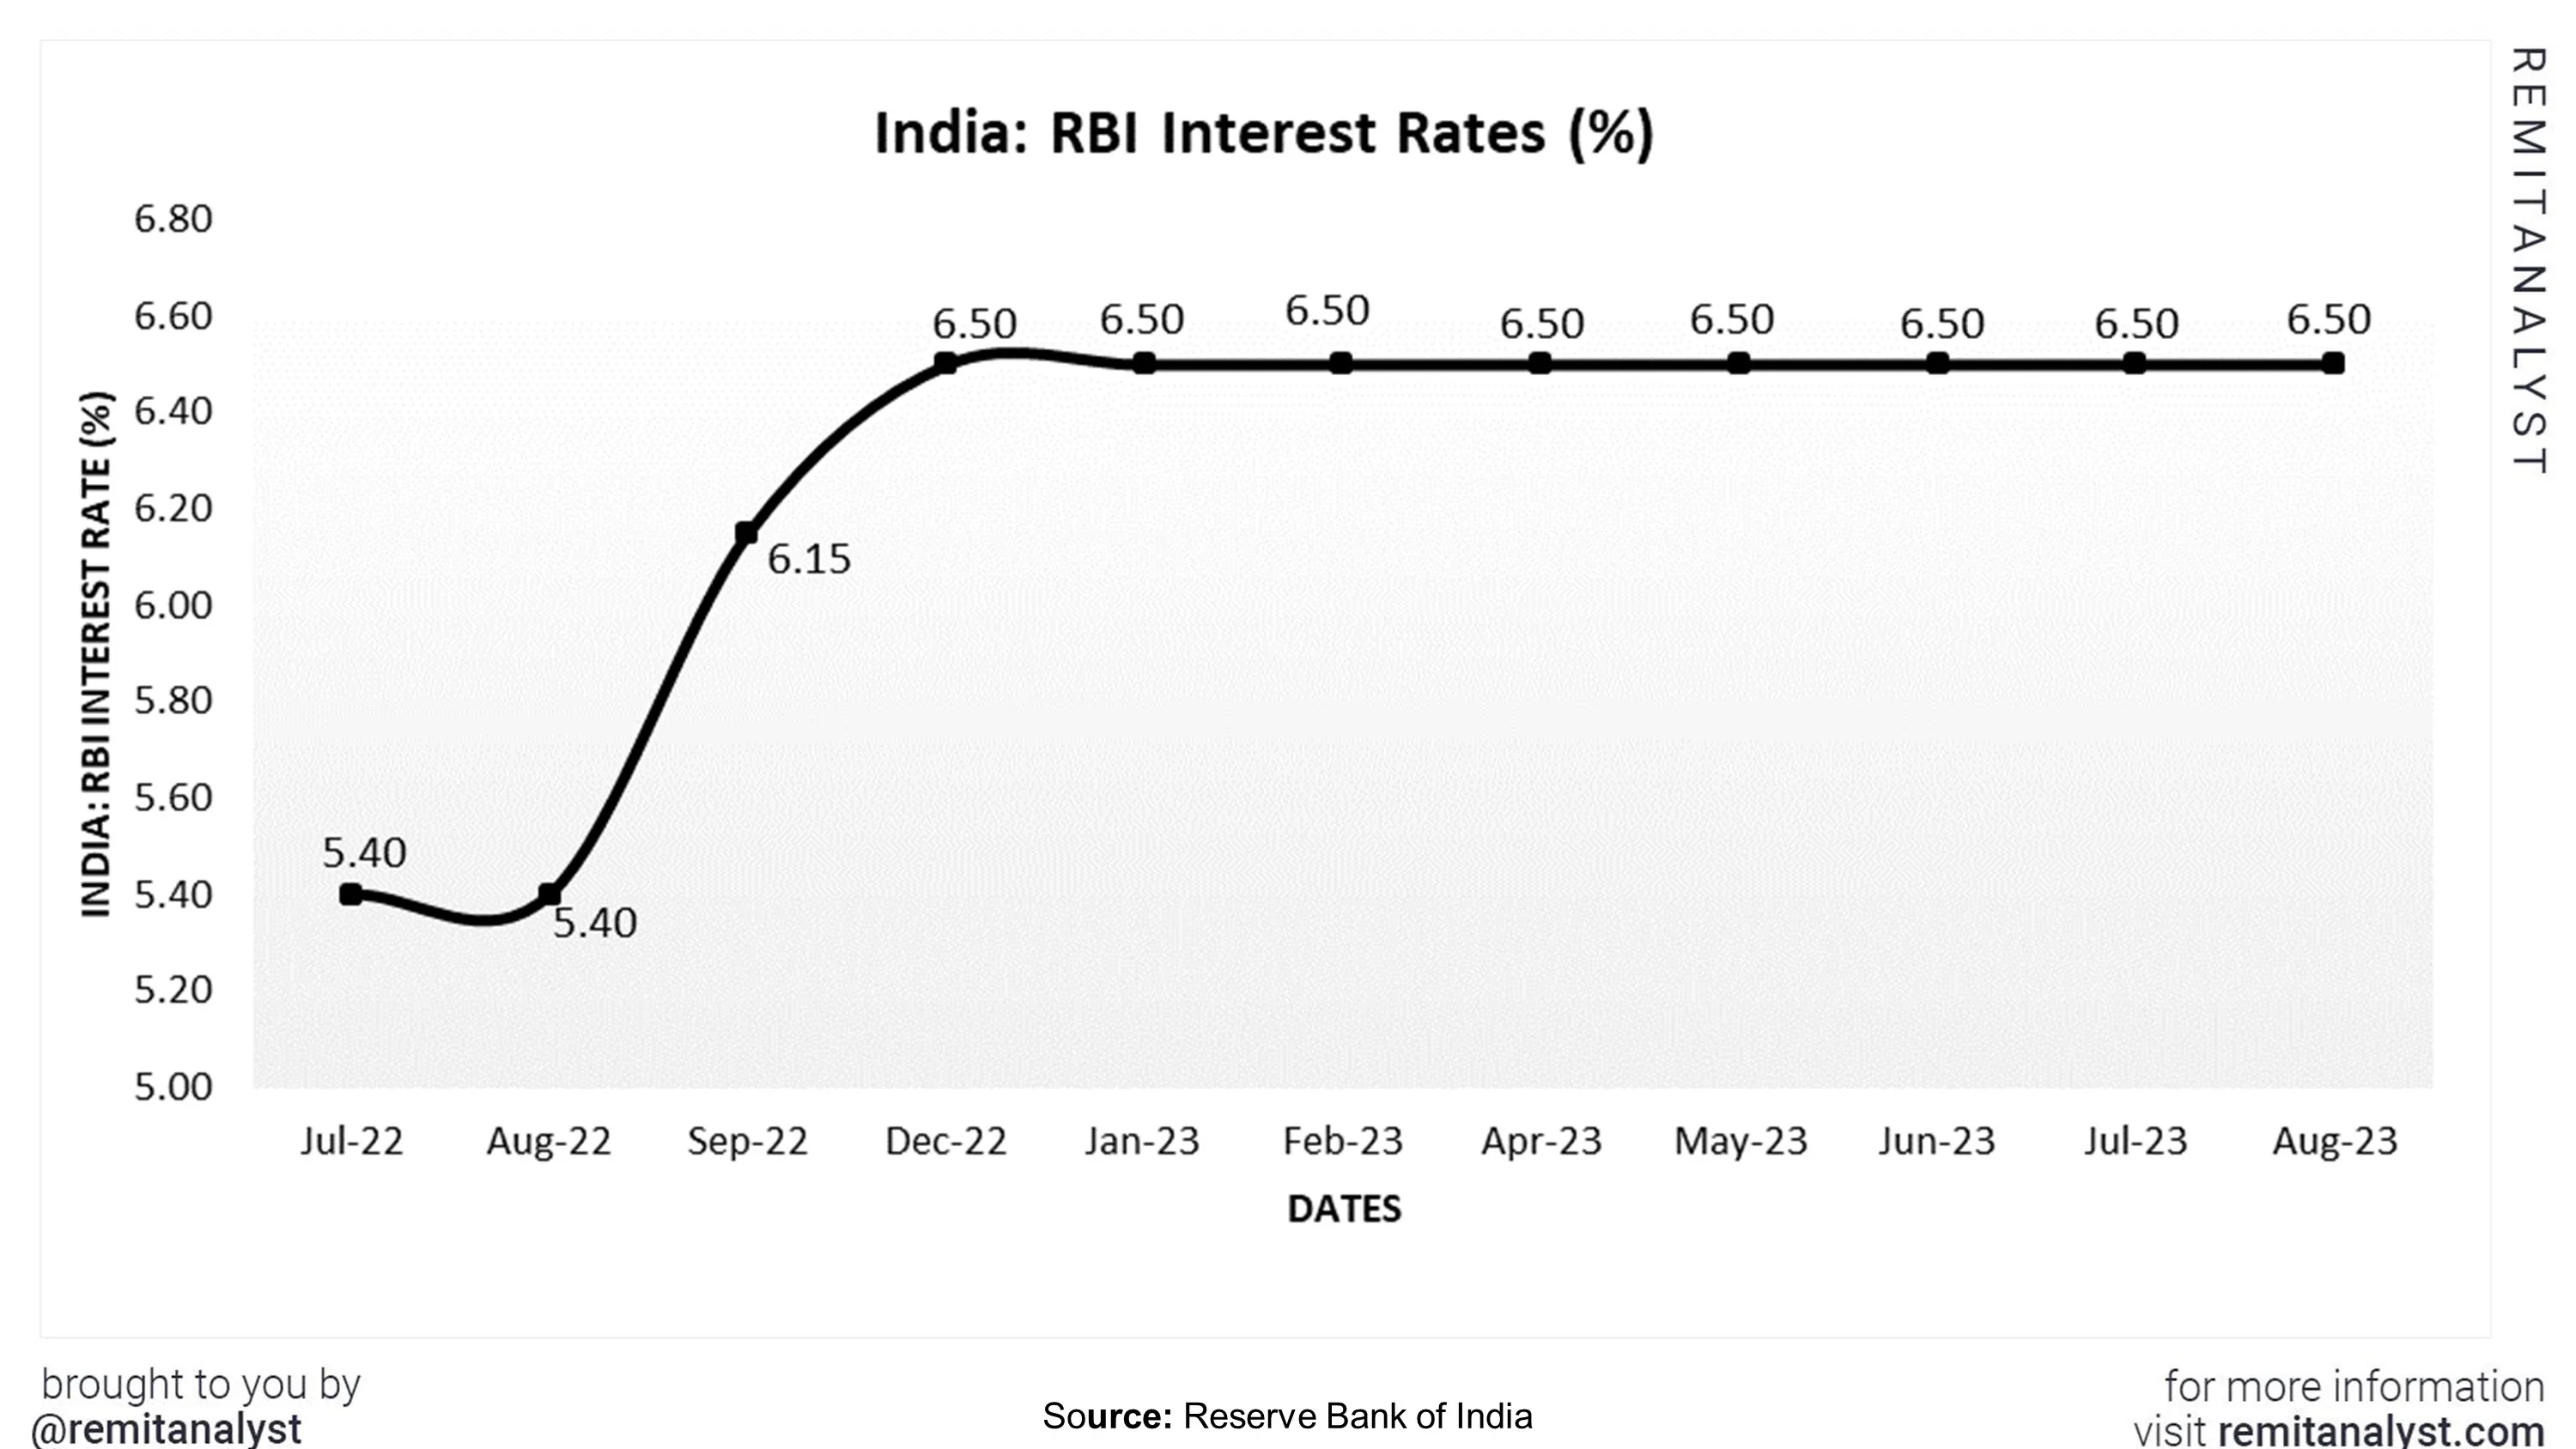 interest-rates-in-india-from-jul-2022-to-aug-2022